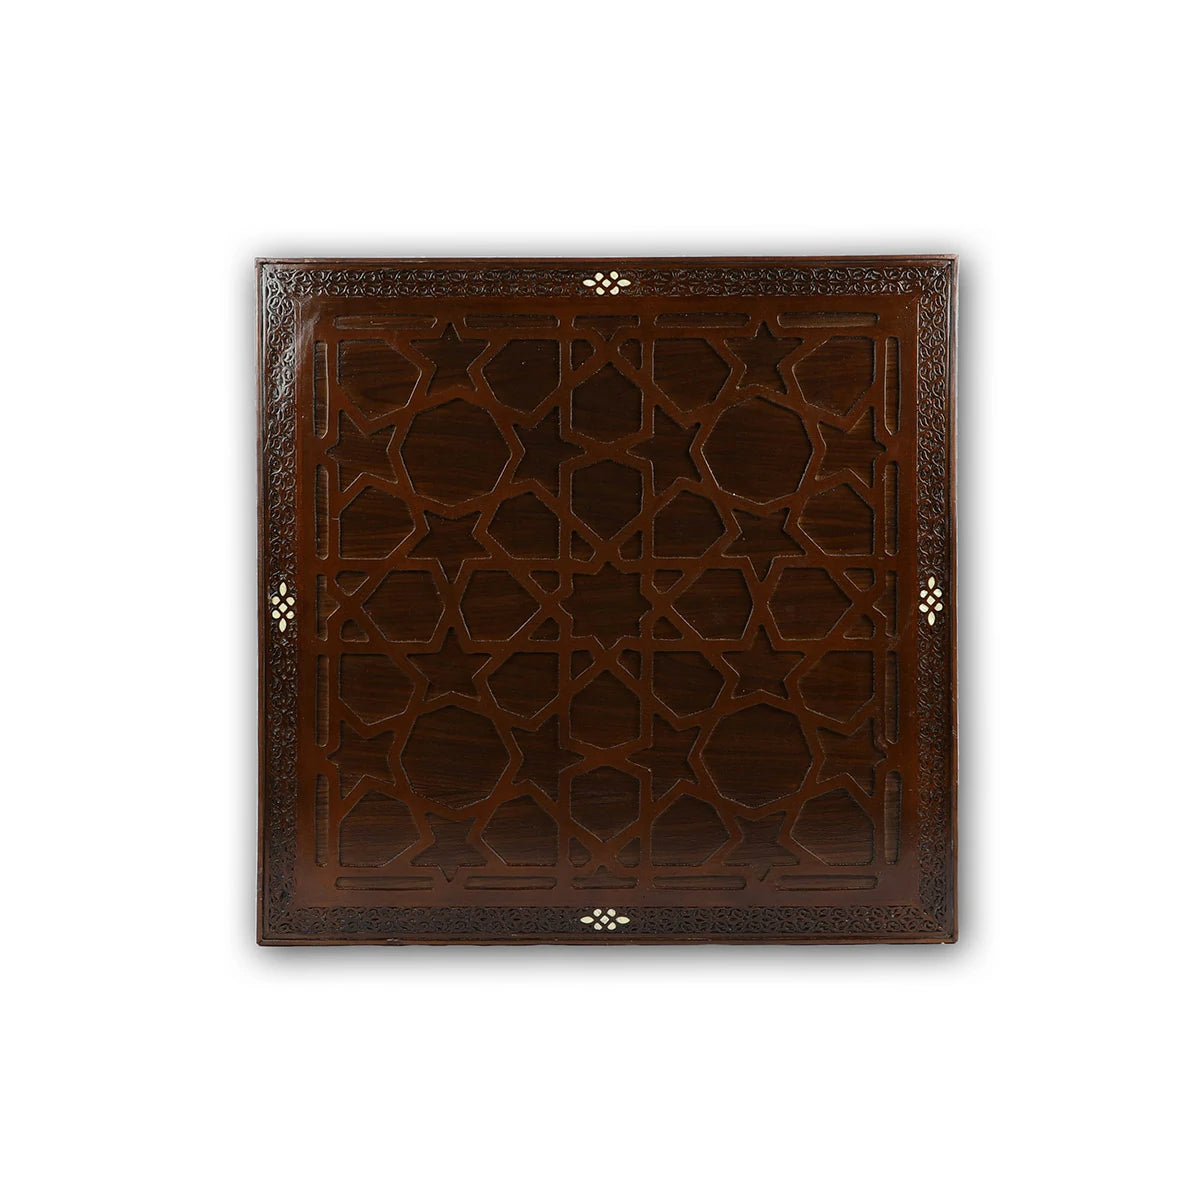 Square Shaped Table Hand-Carved & Inlaid in Traditional Moorish Patterns